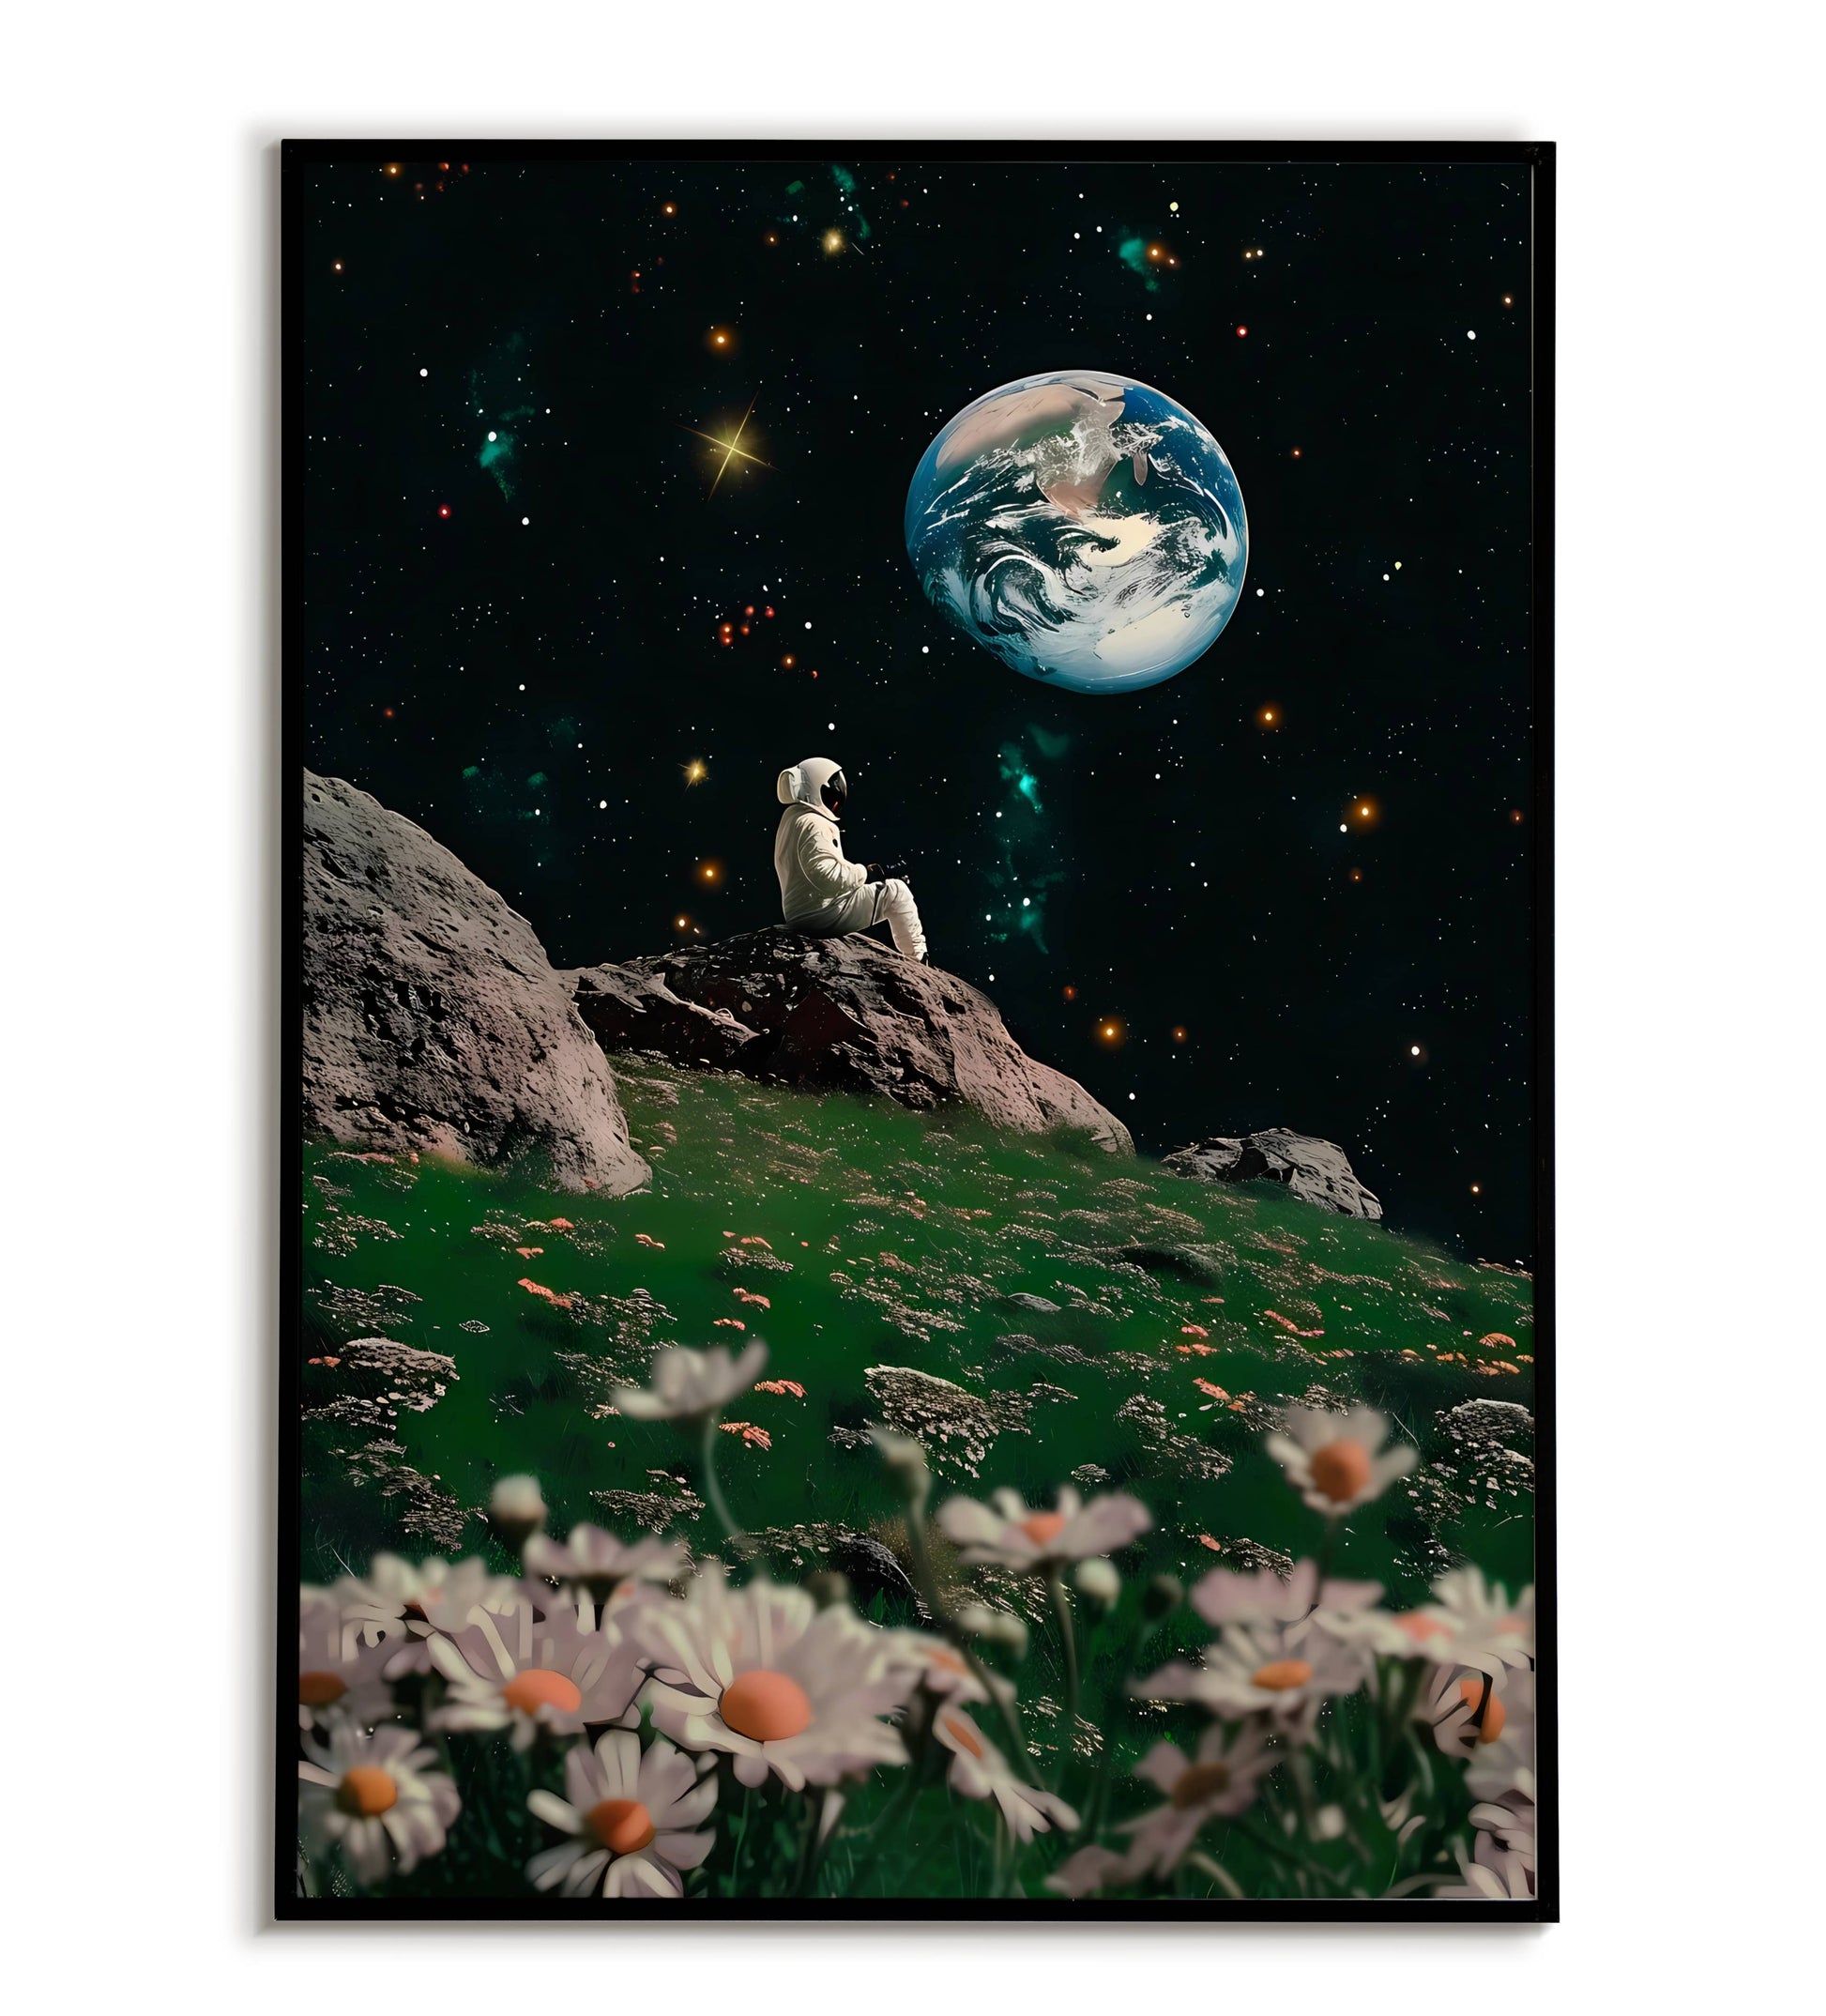 Astronaut's Solitude printable poster. Available for purchase as a physical poster or digital download.